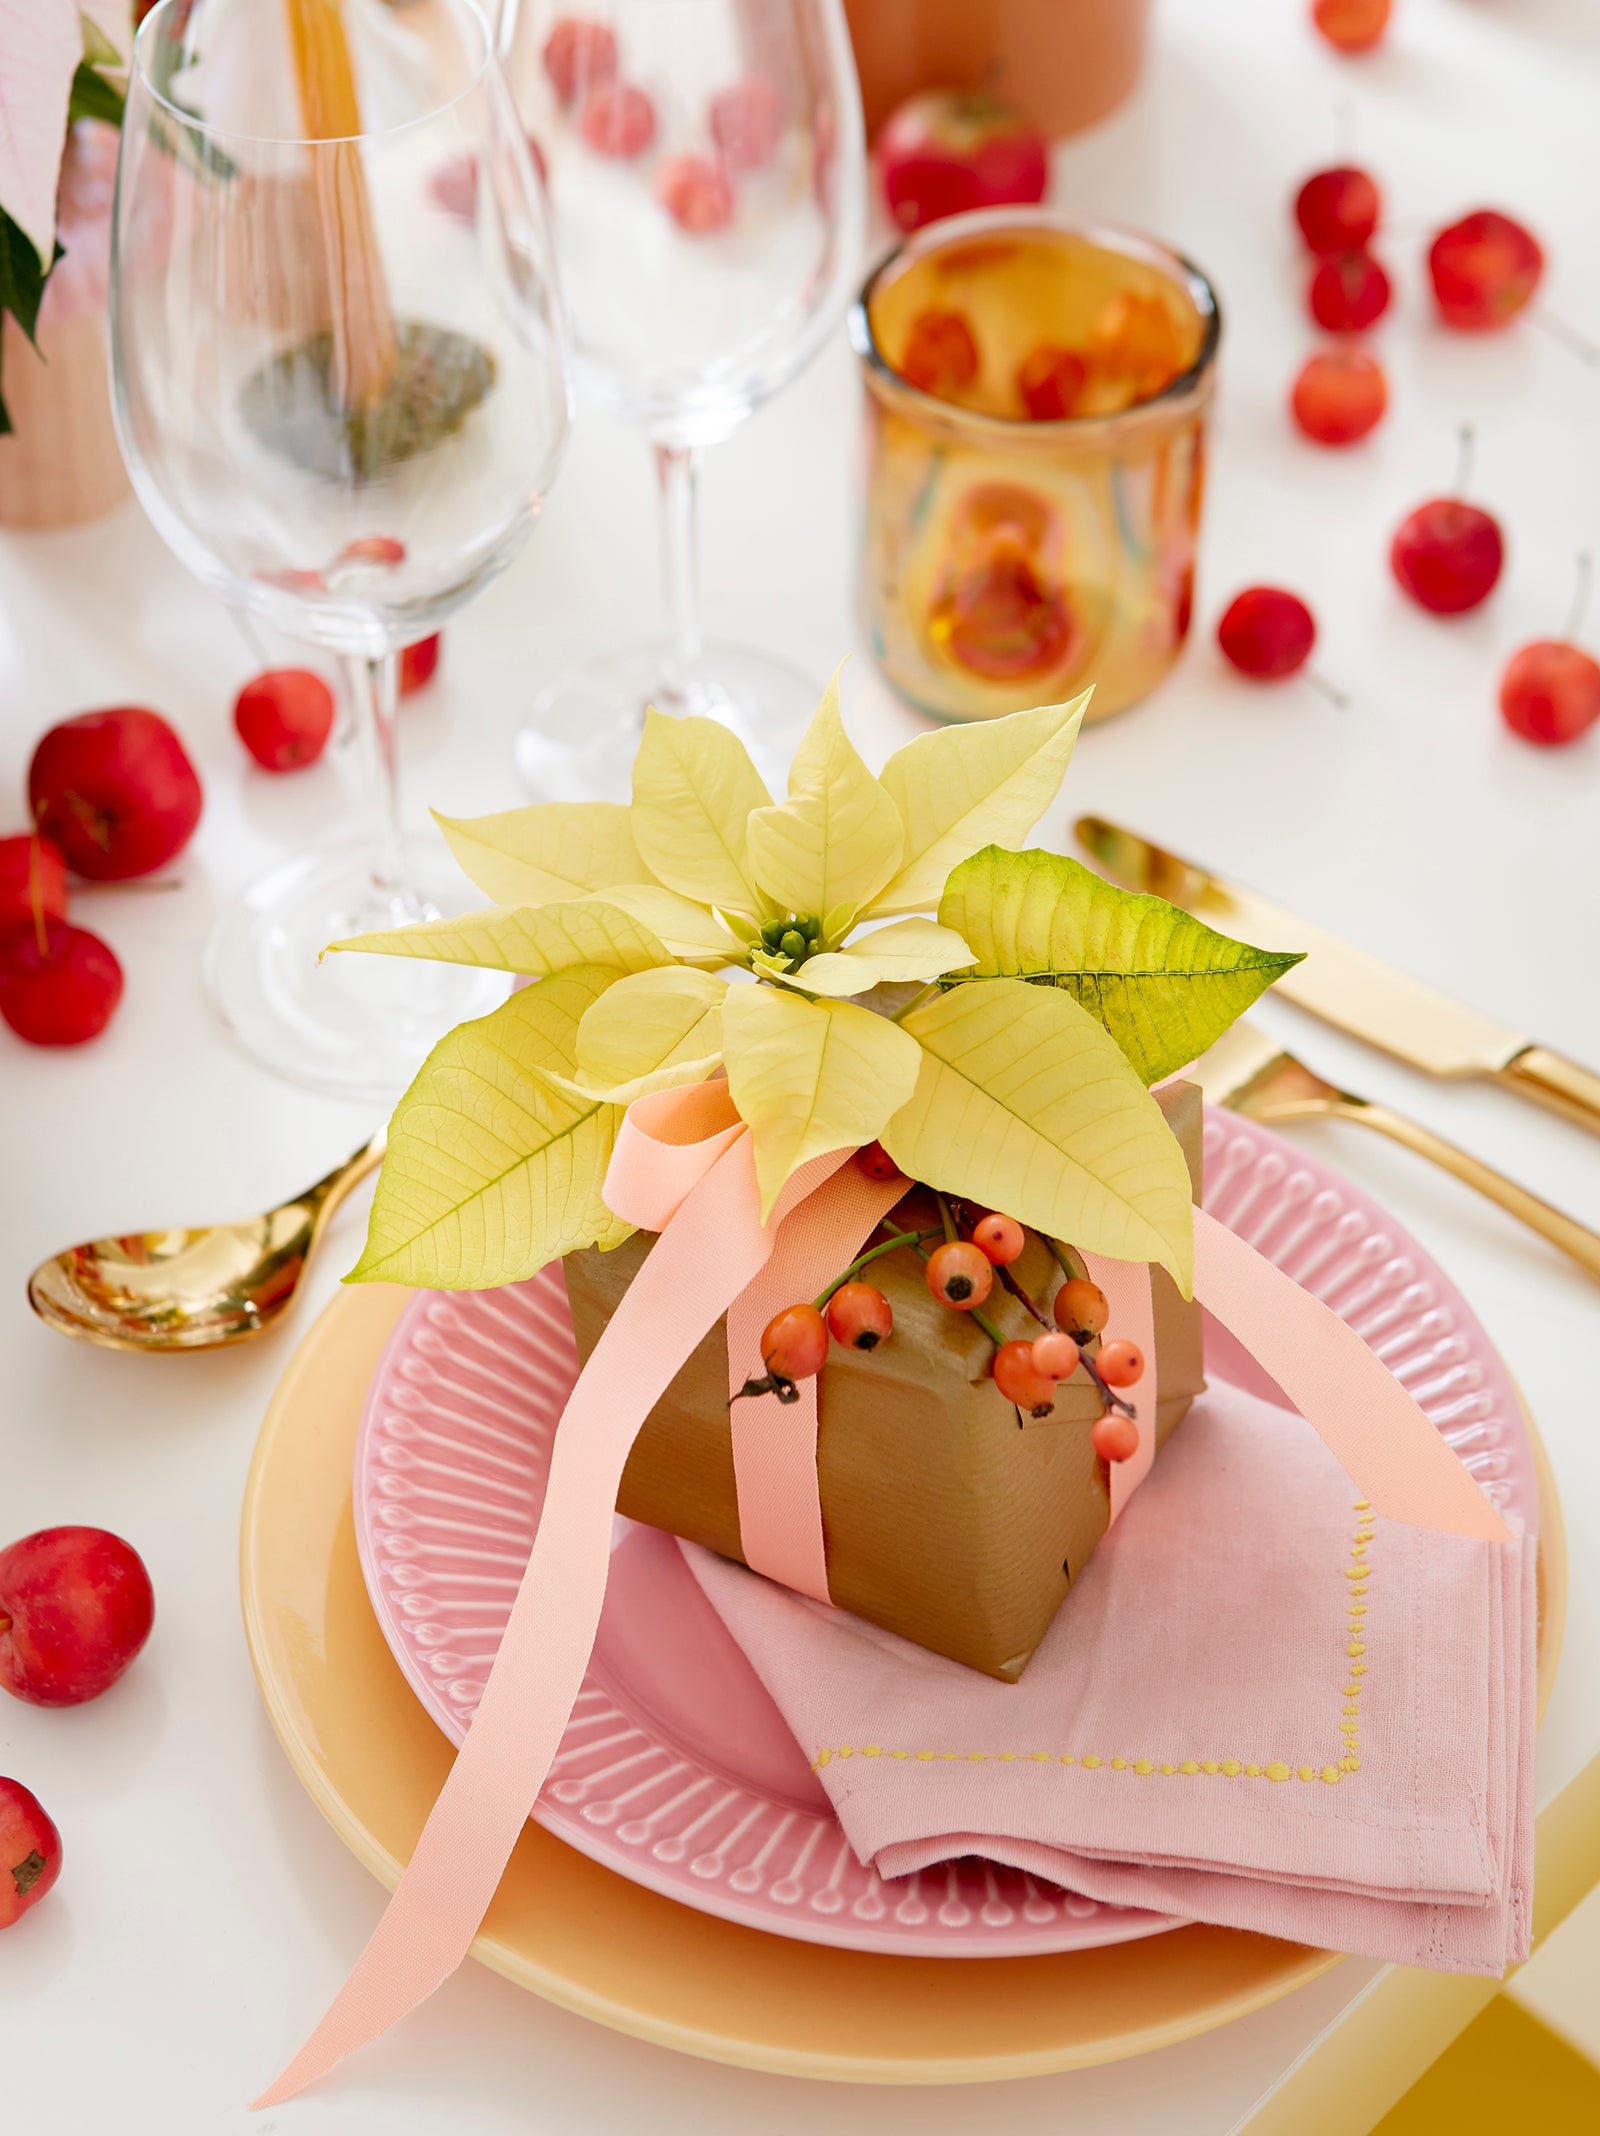 Lemon colored poinsettia placed on small gift box with candy pink ribbon and rose hips